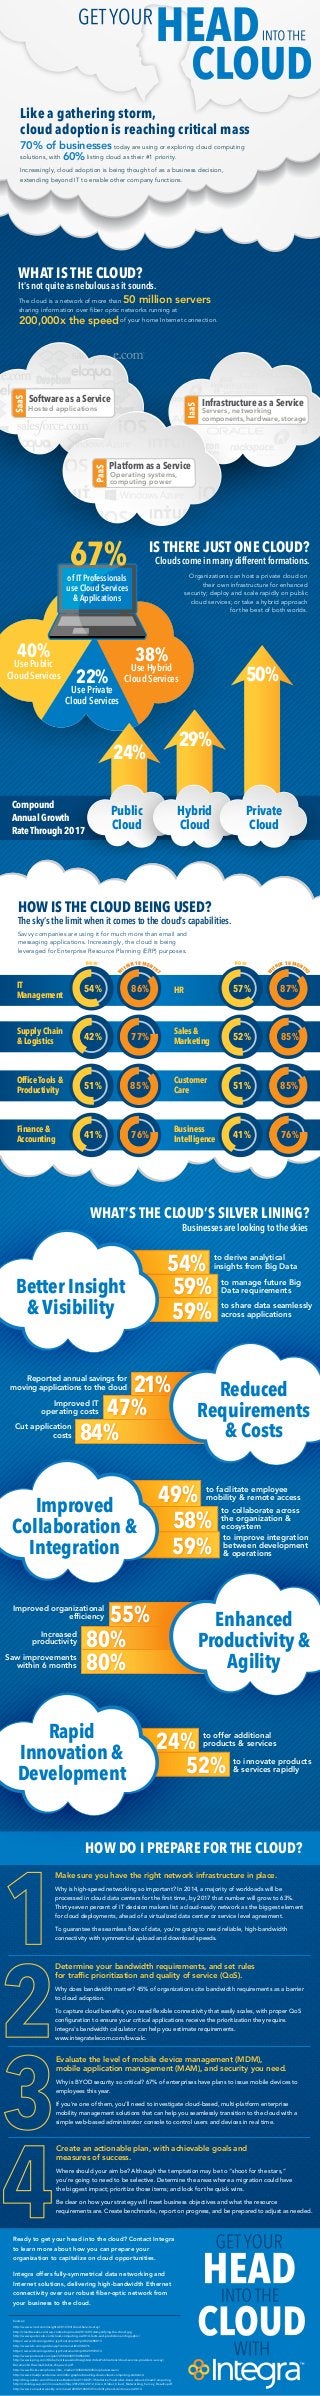 HOW IS THE CLOUD BEING USED?
The sky’s the limit when it comes to the cloud’s capabilities.
Savvy companies are using it for much more than email and
messaging applications. Increasingly, the cloud is being
leveraged for Enterprise Resource Planning (ERP) purposes.
IS THERE JUST ONE CLOUD?
Clouds come in many different formations.
70% of businesses today are using or exploring cloud computing
solutions, with 60% listing cloud as their #1 priority.
Increasingly, cloud adoption is being thought of as a business decision,
extending beyond IT to enable other company functions.
WHAT IS THE CLOUD?
It’s not quite as nebulous as it sounds.
Ready to get your head into the cloud? Contact Integra
to learn more about how you can prepare your
organization to capitalize on cloud opportunities.
Integra offers fully-symmetrical data networking and
Internet solutions, delivering high-bandwidth Ethernet
connectivity over our robust ﬁber-optic network from
your business to the cloud.
Make sure you have the right network infrastructure in place.
Why is high-speed networking so important? In 2014, a majority of workloads will be
processed in cloud data centers for the ﬁrst time, by 2017 that number will grow to 63%.
Thirty-seven percent of IT decision makers list a cloud-ready network as the biggest element
for cloud deployments, ahead of a virtualized data center or service level agreement.
To guarantee the seamless ﬂow of data, you’re going to need reliable, high-bandwidth
connectivity with symmetrical upload and download speeds.
Determine your bandwidth requirements, and set rules
for trafﬁc prioritization and quality of service (QoS).
Why does bandwidth matter? 45% of organizations cite bandwidth requirements as a barrier
to cloud adoption.
To capture cloud beneﬁts, you need ﬂexible connectivity that easily scales, with proper QoS
conﬁguration to ensure your critical applications receive the prioritization they require.
Integra’s bandwidth calculator can help you estimate requirements.
www.integratelecom.com/bwcalc.
Sources:
Organizations can host a private cloud on
their own infrastructure for enhanced
security; deploy and scale rapidly on public
cloud services; or take a hybrid approach
for the best of both worlds.
The cloud is a network of more than 50 million servers
sharing information over ﬁber optic networks running at
200,000x the speed of your home Internet connection.
40%
Use Public
Cloud Services
38%
Use Hybrid
Cloud Services22%
Use Private
Cloud Services
of IT Professionals
use Cloud Services
& Applications
67%
Create an actionable plan, with achievable goals and
measures of success.
Where should your aim be? Although the temptation may be to “shoot for the stars,”
you’re going to need to be selective. Determine the areas where a migration could have
the biggest impact; prioritize those items; and look for the quick wins.
Be clear on how your strategy will meet business objectives and what the resource
requirements are. Create benchmarks, report on progress, and be prepared to adjust as needed.
Evaluate the level of mobile device management (MDM),
mobile application management (MAM), and security you need.
Why is BYOD security so critical? 67% of enterprises have plans to issue mobile devices to
employees this year.
If you’re one of them, you’ll need to investigate cloud-based, multi-platform enterprise
mobility management solutions that can help you seamlessly transition to the cloud with a
simple web-based administrator console to control users and devices in real time.
IT
Management
HR 57% 87%
Supply Chain
& Logistics
Sales &
Marketing42% 77% 52% 85%
Office Tools &
Productivity
Customer
Care51% 85% 51% 85%
Compound
Annual Growth
RateThrough 2017
Public
Cloud
Private
Cloud
Hybrid
Cloud
50%
29%
24%
WHAT’S THE CLOUD’S SILVER LINING?
21%
47%
84%
Reported annual savings for
moving applications to the cloud
Improved IT
operating costs
Cut application
costs
Software as a Service
Hosted applications
86%
W
ITHIN 18 MONTH
S
NOW
W
ITHIN 18 MONTH
S
NOW
54%
HOW DO I PREPARE FOR THE CLOUD?
Infrastructure as a Service
Servers, networking
components,hardware,storage
Platform as a Service
Operating systems,
computing power
Better Insight
& Visibility
59%
59%
to derive analytical
insights from Big Data
to manage future Big
Data requirements
to share data seamlessly
across applications
54%
52%
to offer additional
products & services
to innovate products
& services rapidly
24%
Reduced
Requirements
& Costs
55%
80%
80%
Improved
Collaboration &
Integration
58%
59%
to facilitate employee
mobility & remote access
to collaborate across
the organization &
ecosystem
to improve integration
between development
& operations
49%
Enhanced
Productivity &
Agility
Finance &
Accounting
Business
Intelligence41% 76% 41% 76%
Rapid
Innovation &
Development
Improved organizational
efﬁciency
Increased
productivity
Saw improvements
within 6 months
Businesses are looking to the skies
Like a gathering storm,
cloud adoption is reaching critical mass
http://www.wired.com/insights/2012/03/cloud-here-to-stay/
http://cloudtweaks.com/wp-content/uploads/2014/01/demystifying-the-cloud.jpg
http://www.quotecolo.com/cloud-computing-in-2014-facts-and-predictions-infographic/
https://www.idc.com/getdoc.jsp?containerId=prUS24298013
http://www.idc.com/getdoc.jsp?containerId=240276
https://www.idc.com/getdoc.jsp?containerId=prUS23972413
http://www.pinterest.com/pin/72550243970496698/
http://www.kpmg.com/Global/en/IssuesAndInsights/ArticlesPublications/cloud-service-providers-survey/
Documents/the-cloud-takes-shape-v4.pdf
http://www.ﬂickr.com/photos/ibm_media/10458282035/in/photostream/
http://www.cloudproviderusa.com/inforgraphic-breaking-down-cloud-computing-statistics/
http://blog.nskinc.com/IT-Services-Boston/bid/118077/7-Statistics-You-Didn-t-Know-About-Cloud-Computing
http://cdn.blog-sap.com/innovation/ﬁles/2012/06/2012_Cisco_Global_Cloud_Networking_Survey_Results.pdf
http://www.computerweekly.com/news/2240212605/IT-mobility-trend-continues-in-2014
 